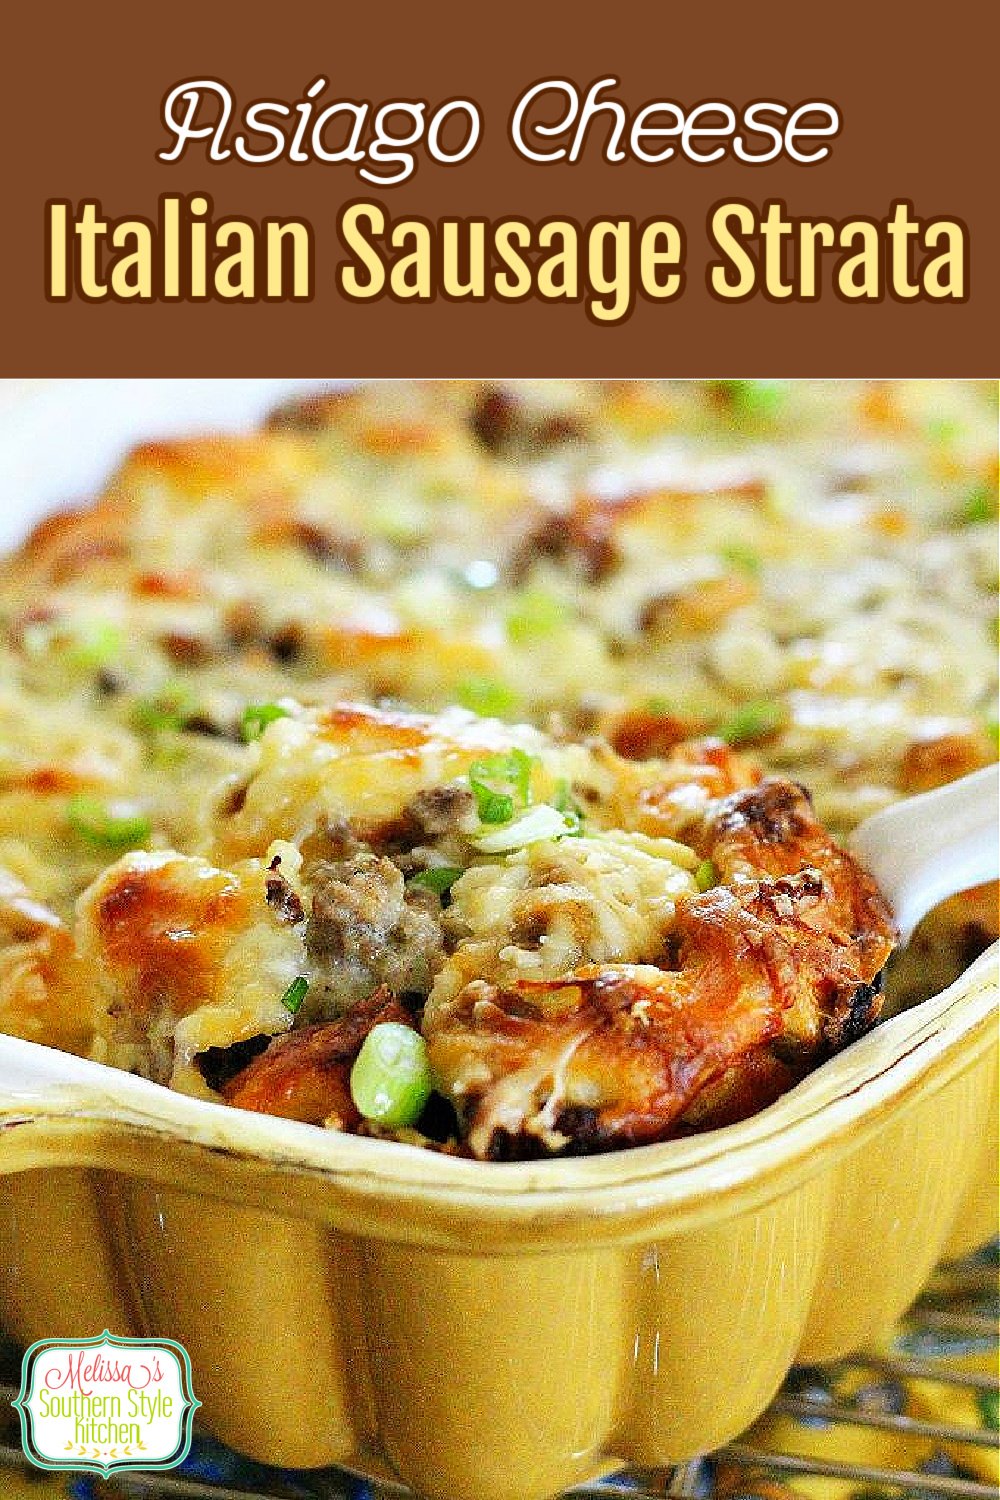 Serve this mouthwatering Asiago Cheese Italian Sausage Strata for breakfast, brunch or dinner #asiagocheese #Italiansausagestrata #stratrecipes #overnightcasseroles #brunch #holidaybrunch #Italian #breakfast #dinnerideas #southernfood #southernrecipes #Christmasbrunch #easterbrunch